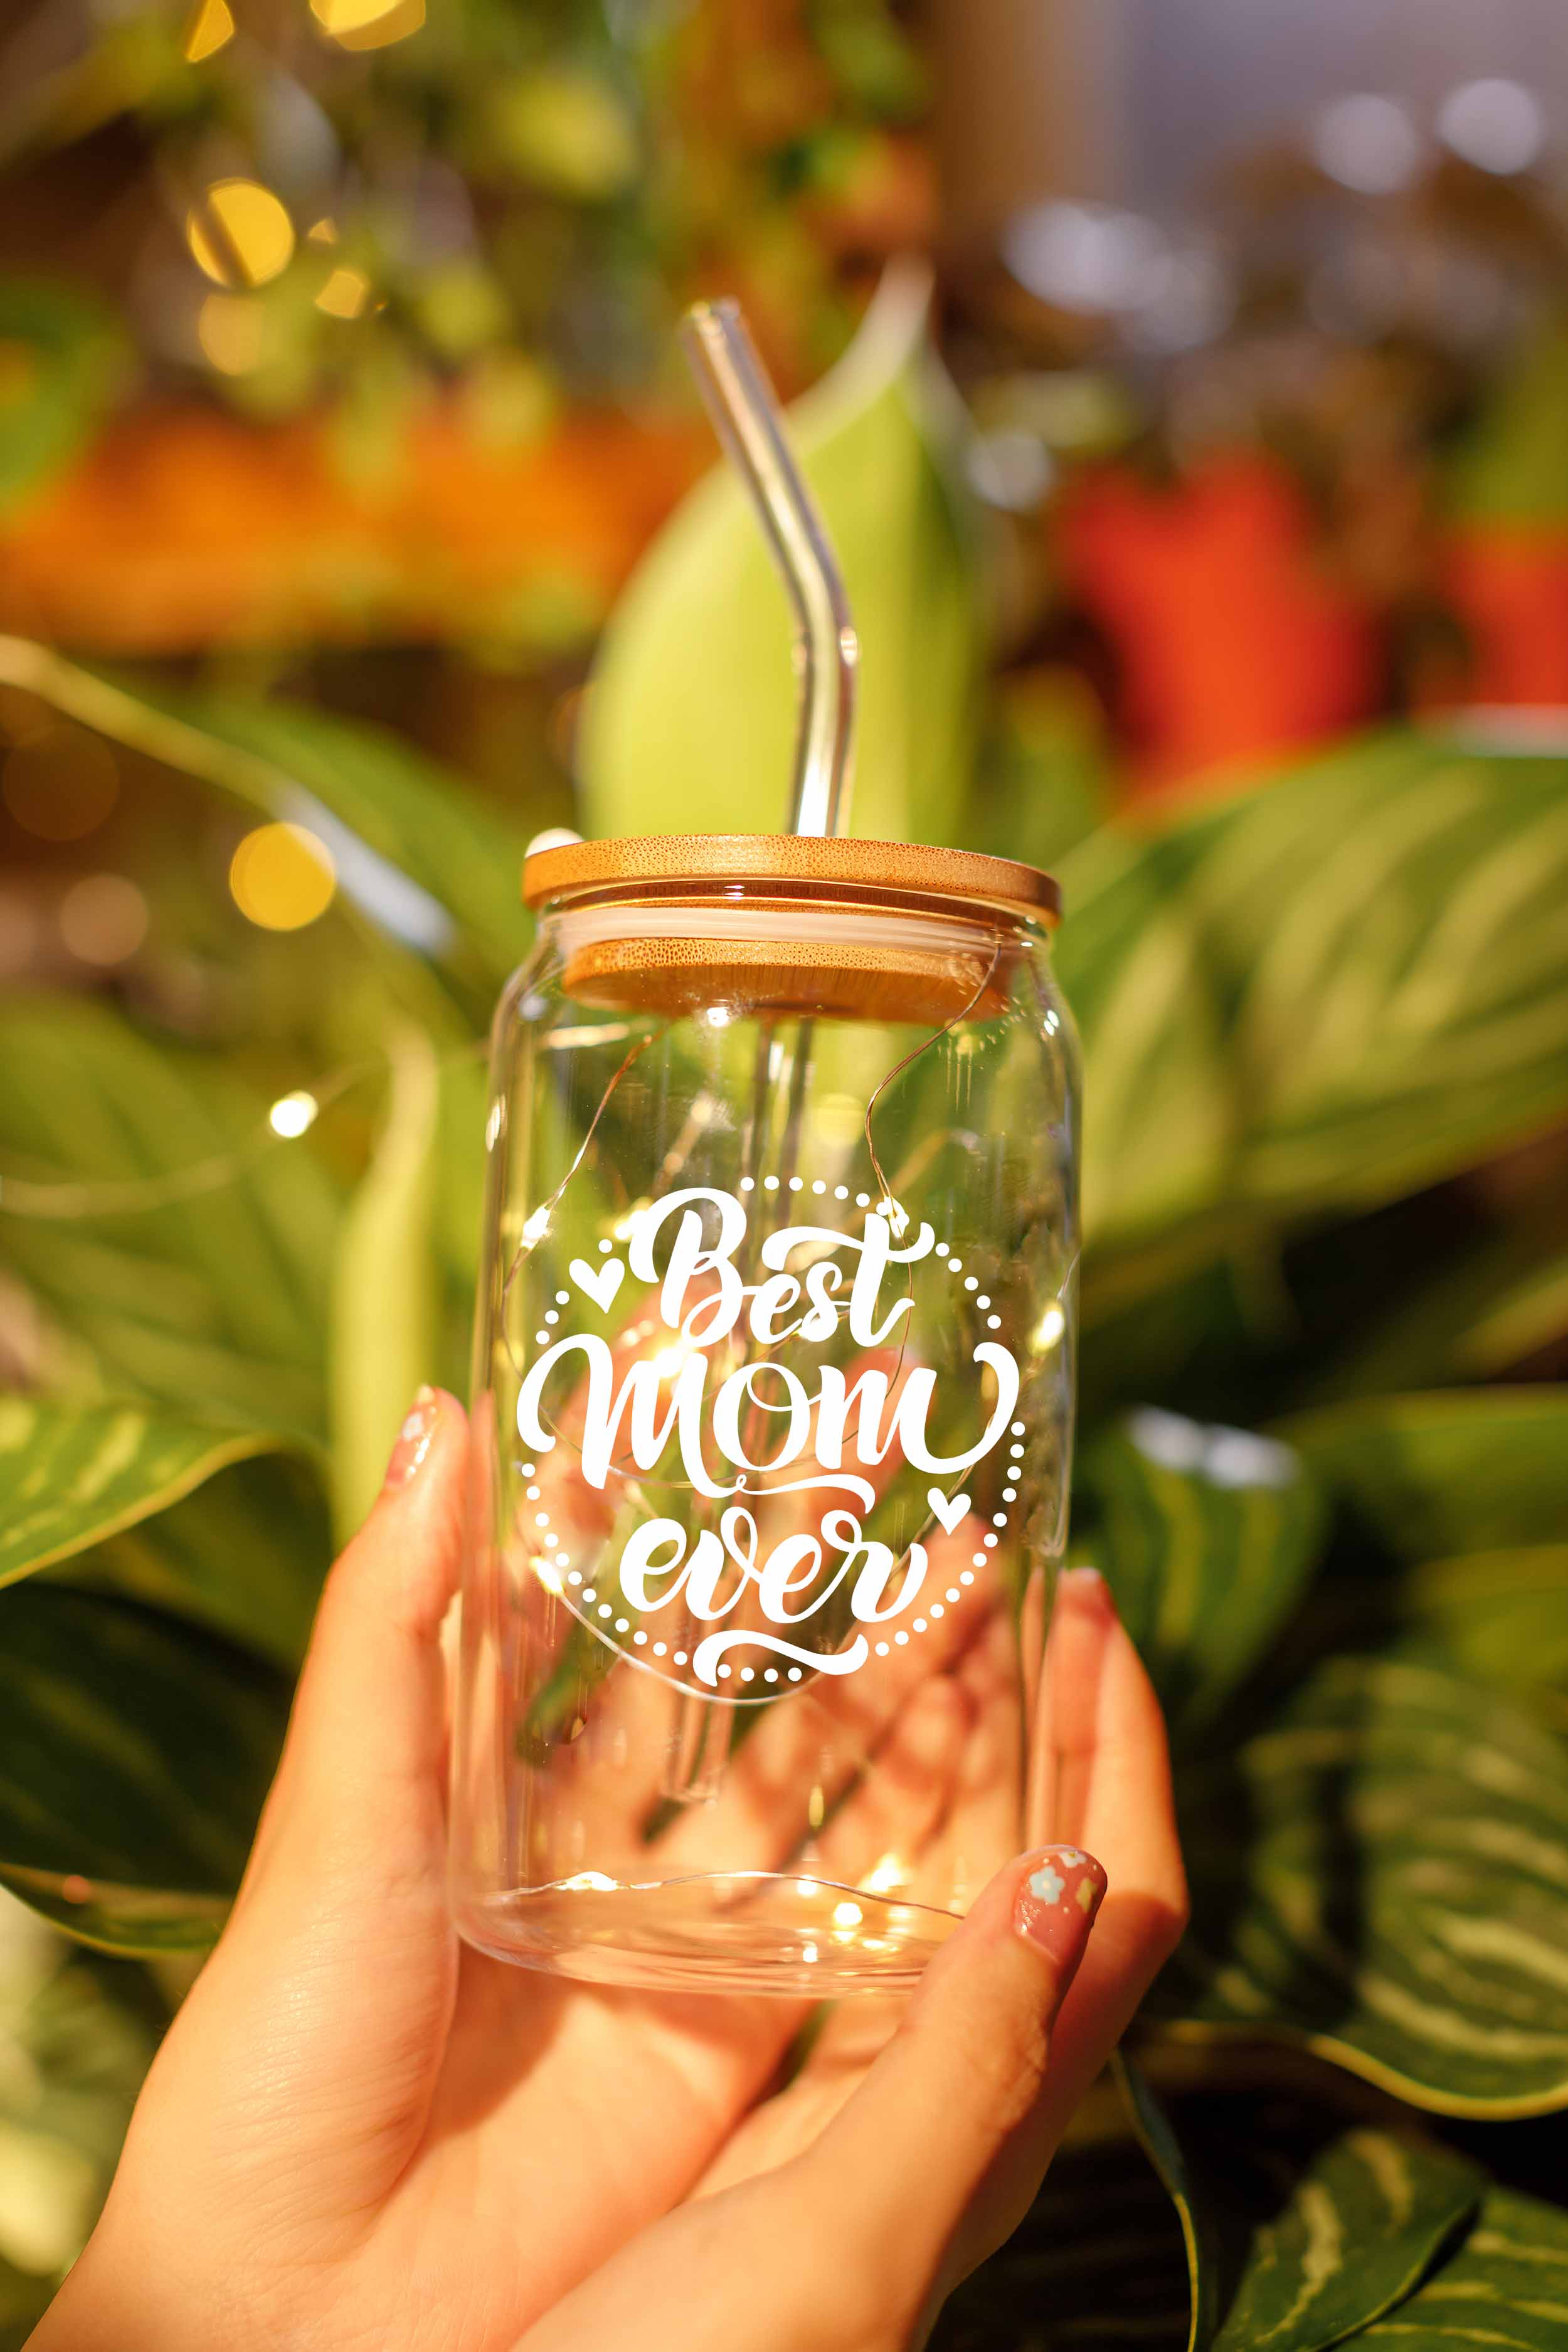 Unique Mom Gifts - Mother's Day Gifts, Mother Day Gifts, Birthday Presents  For Mom - Good Gifts For Moms, Gifts For Mothers - 16OZ Can Glass